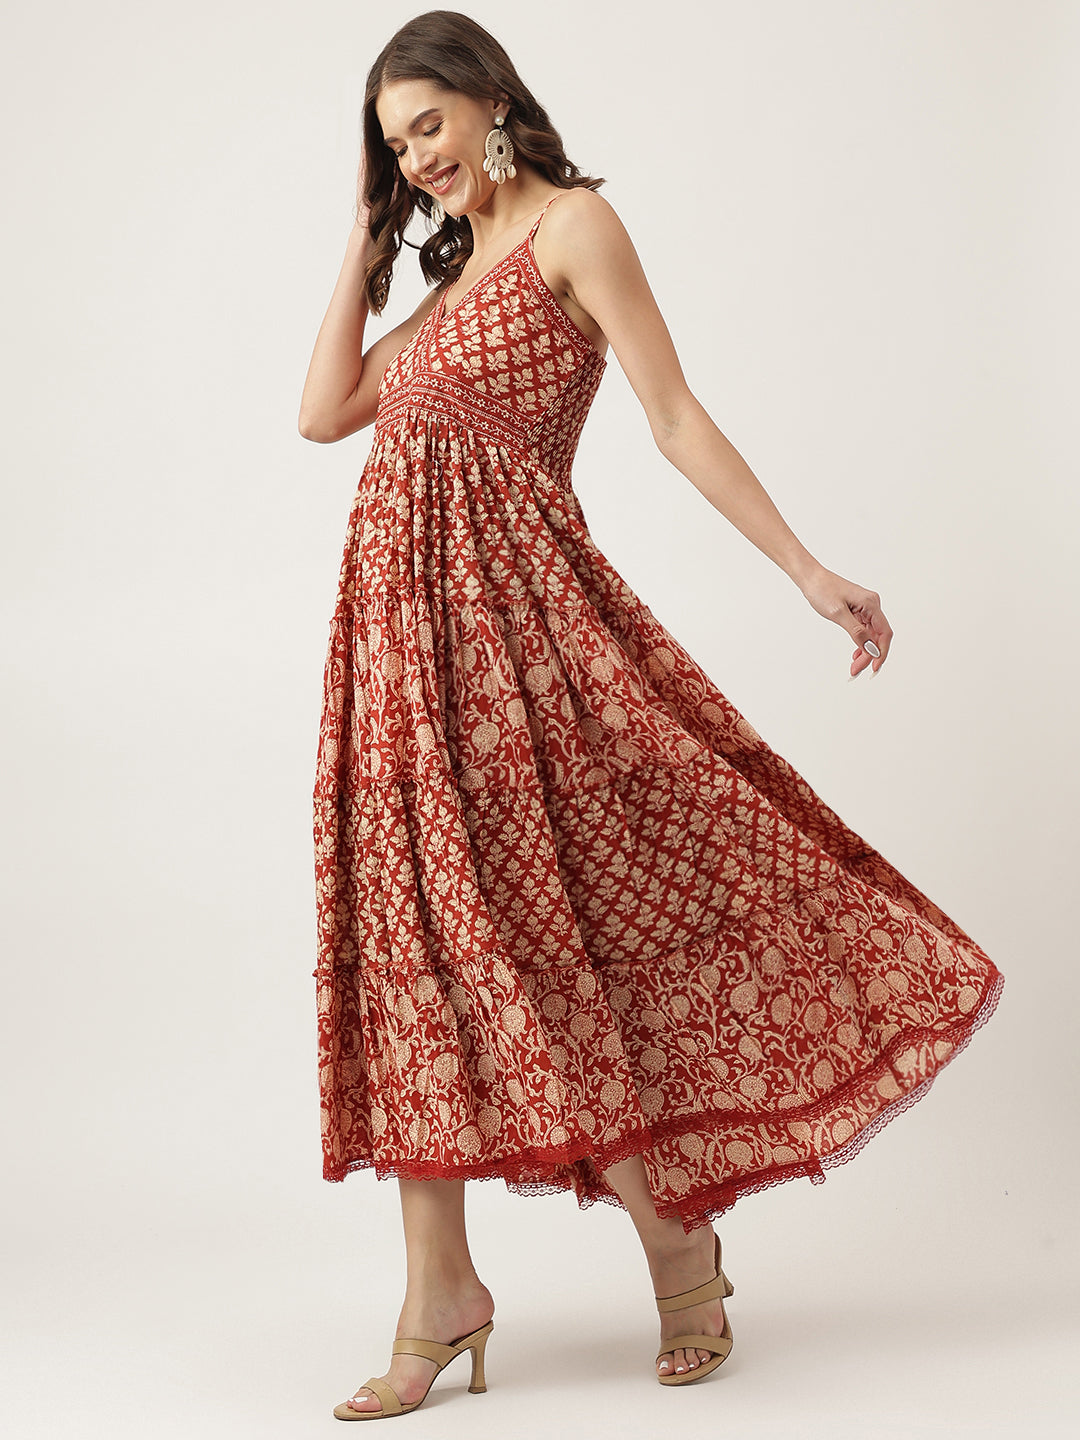 Divena Maroon Floral printed Cotton Tiered Dress with Smoking Back